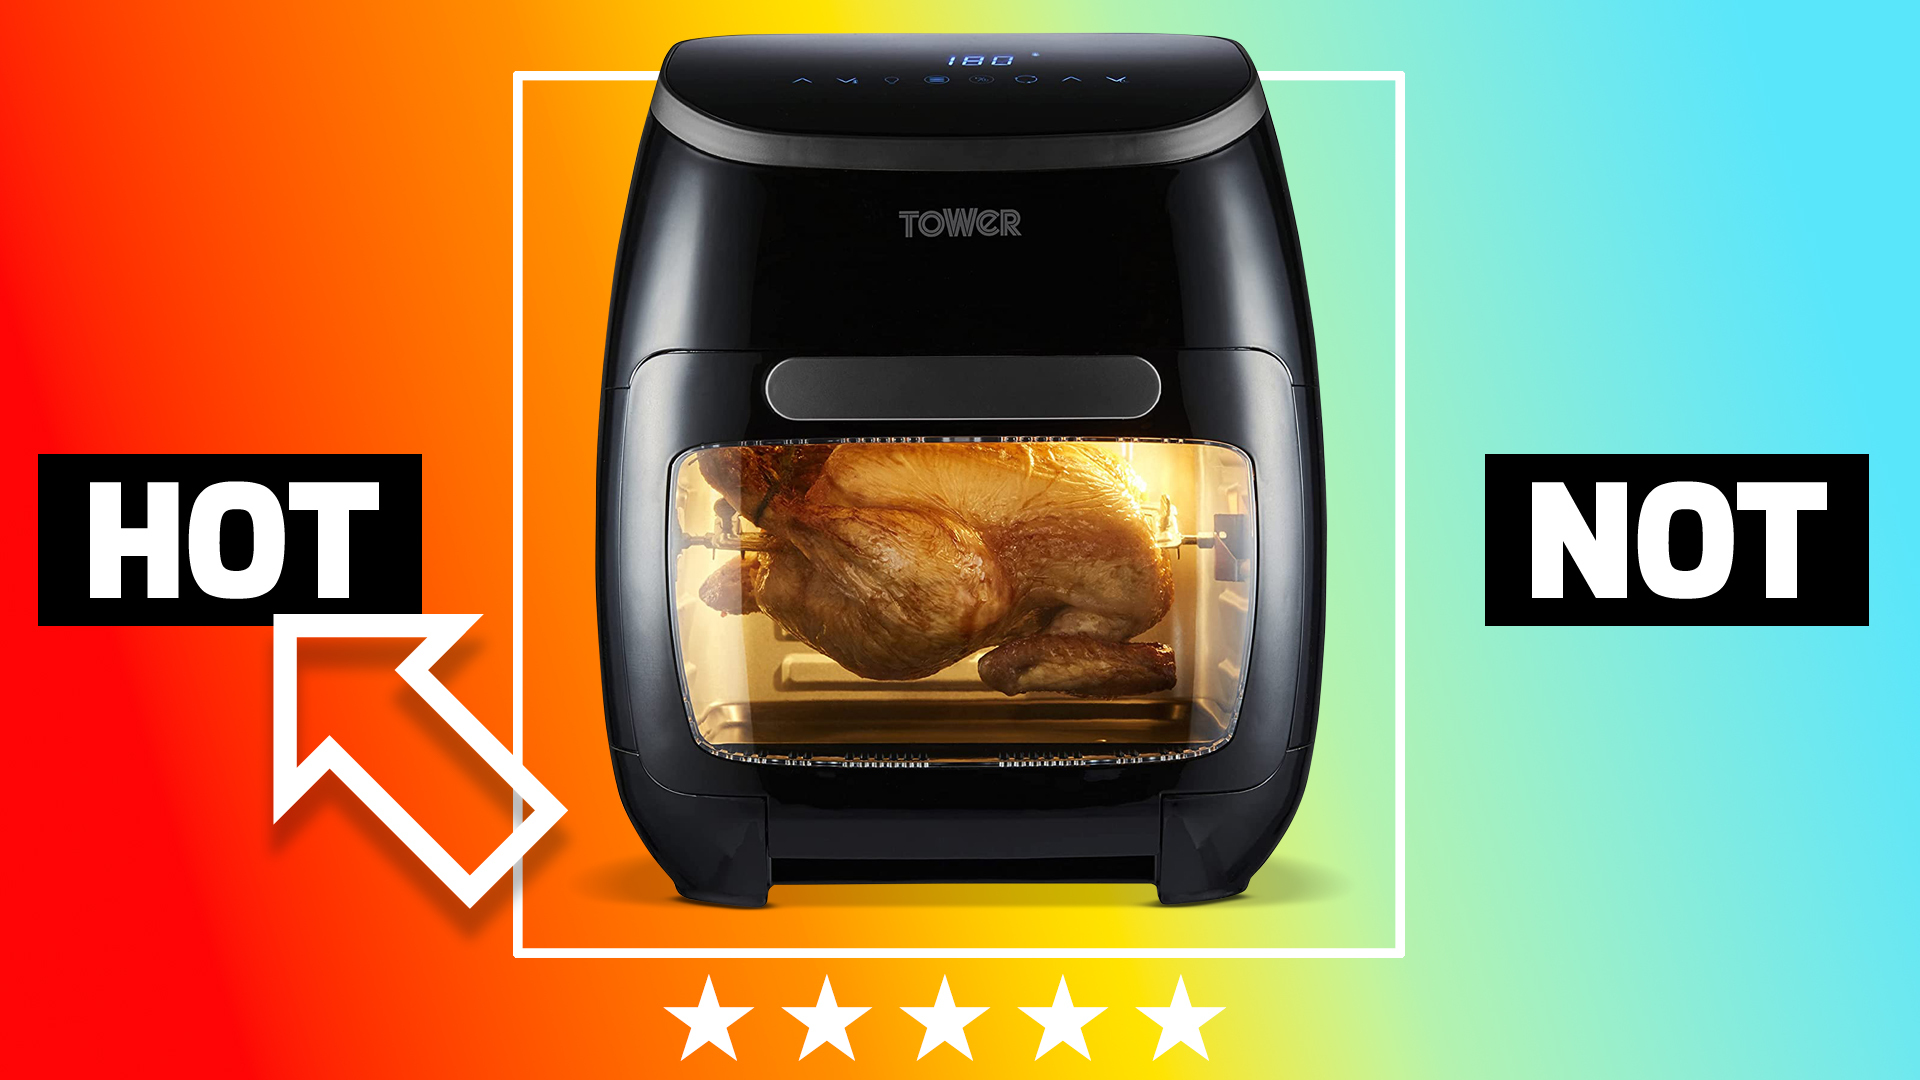 Hot or not text next to an air fryer with a mouse cursos moving across the screen